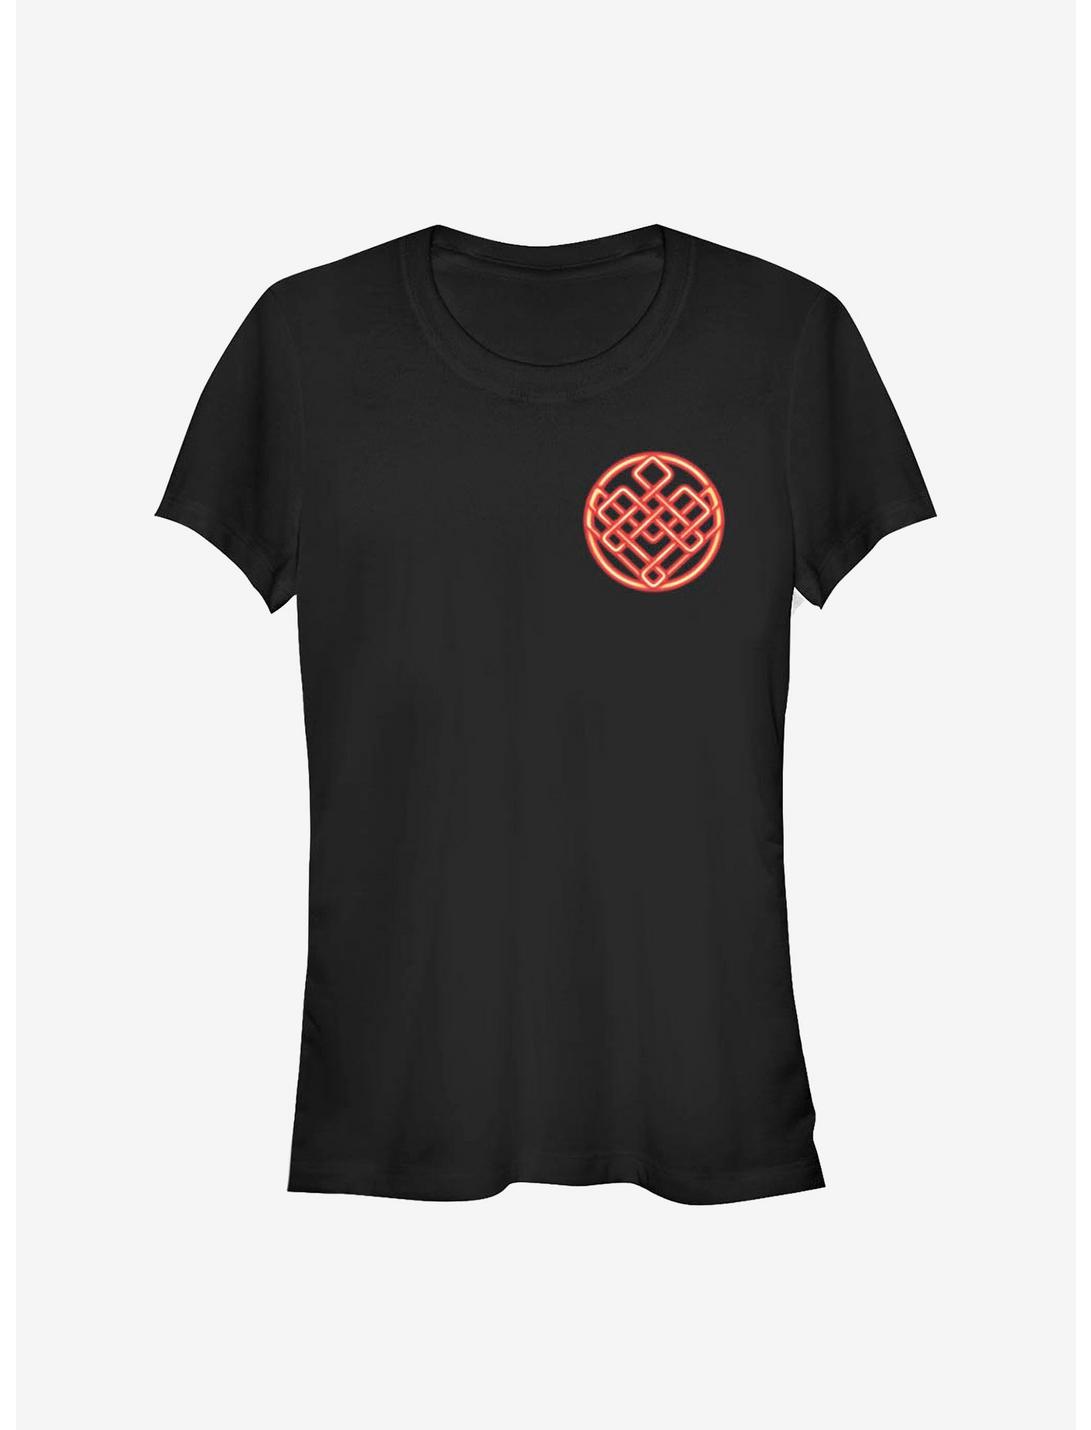 Marvel Shang-Chi And The Legend Of The Ten Rings Symbol Badge Girls T-Shirt, BLACK, hi-res